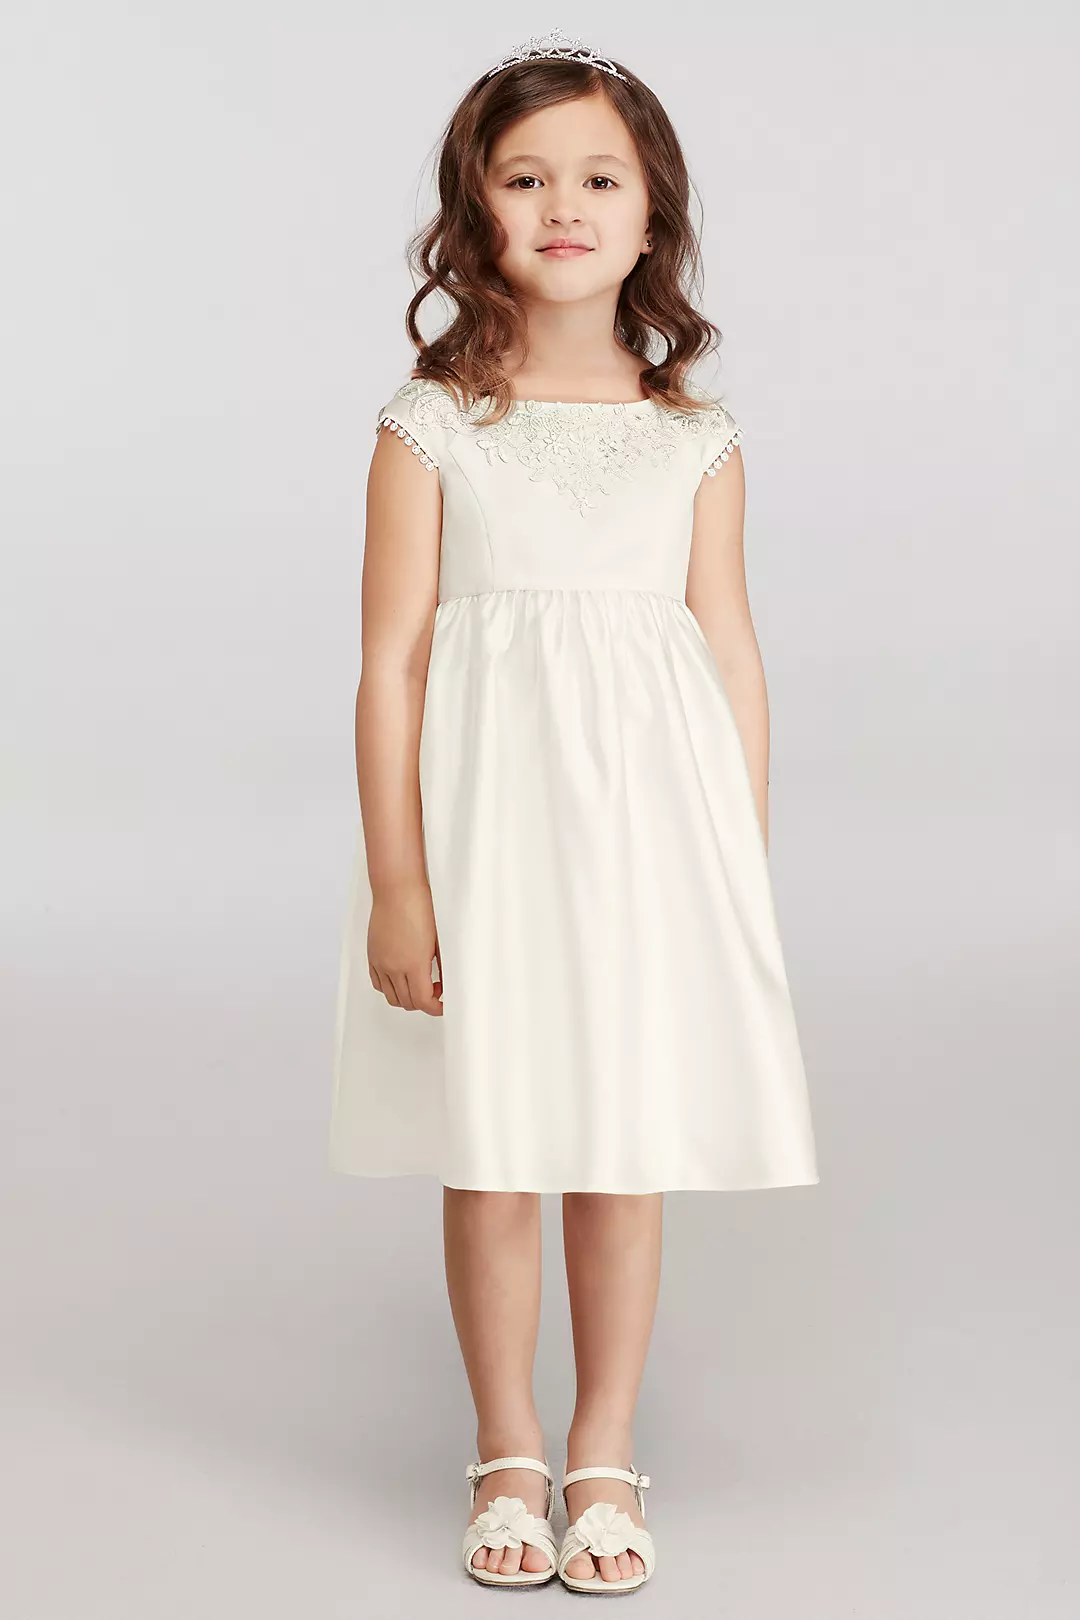 Cap Sleeve Flower Girl Dress with Lace Appliques Image